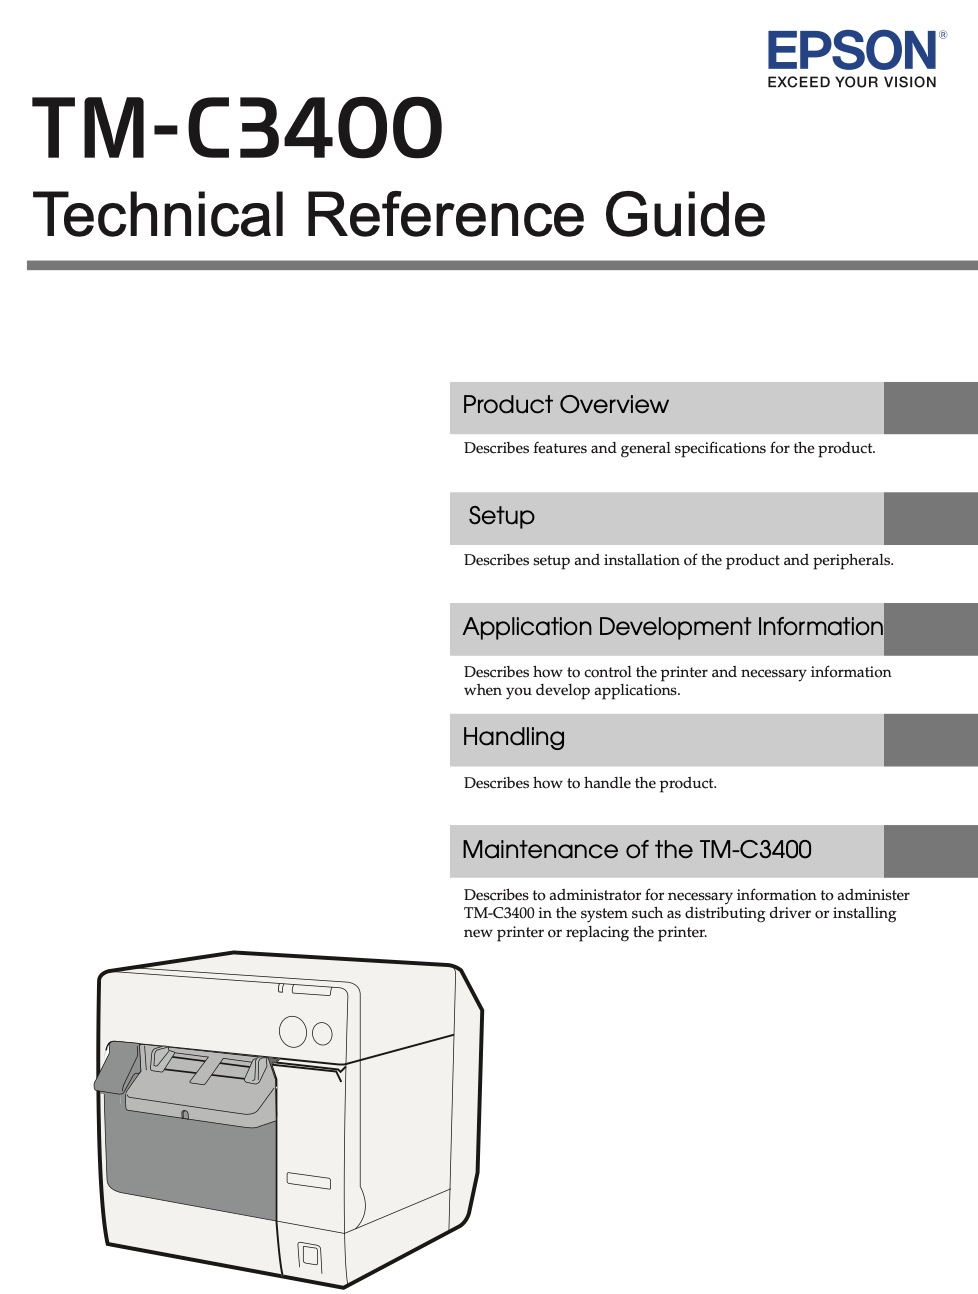 Epson TM-C3400 Technical Reference Guide <font color=red>New!</font>